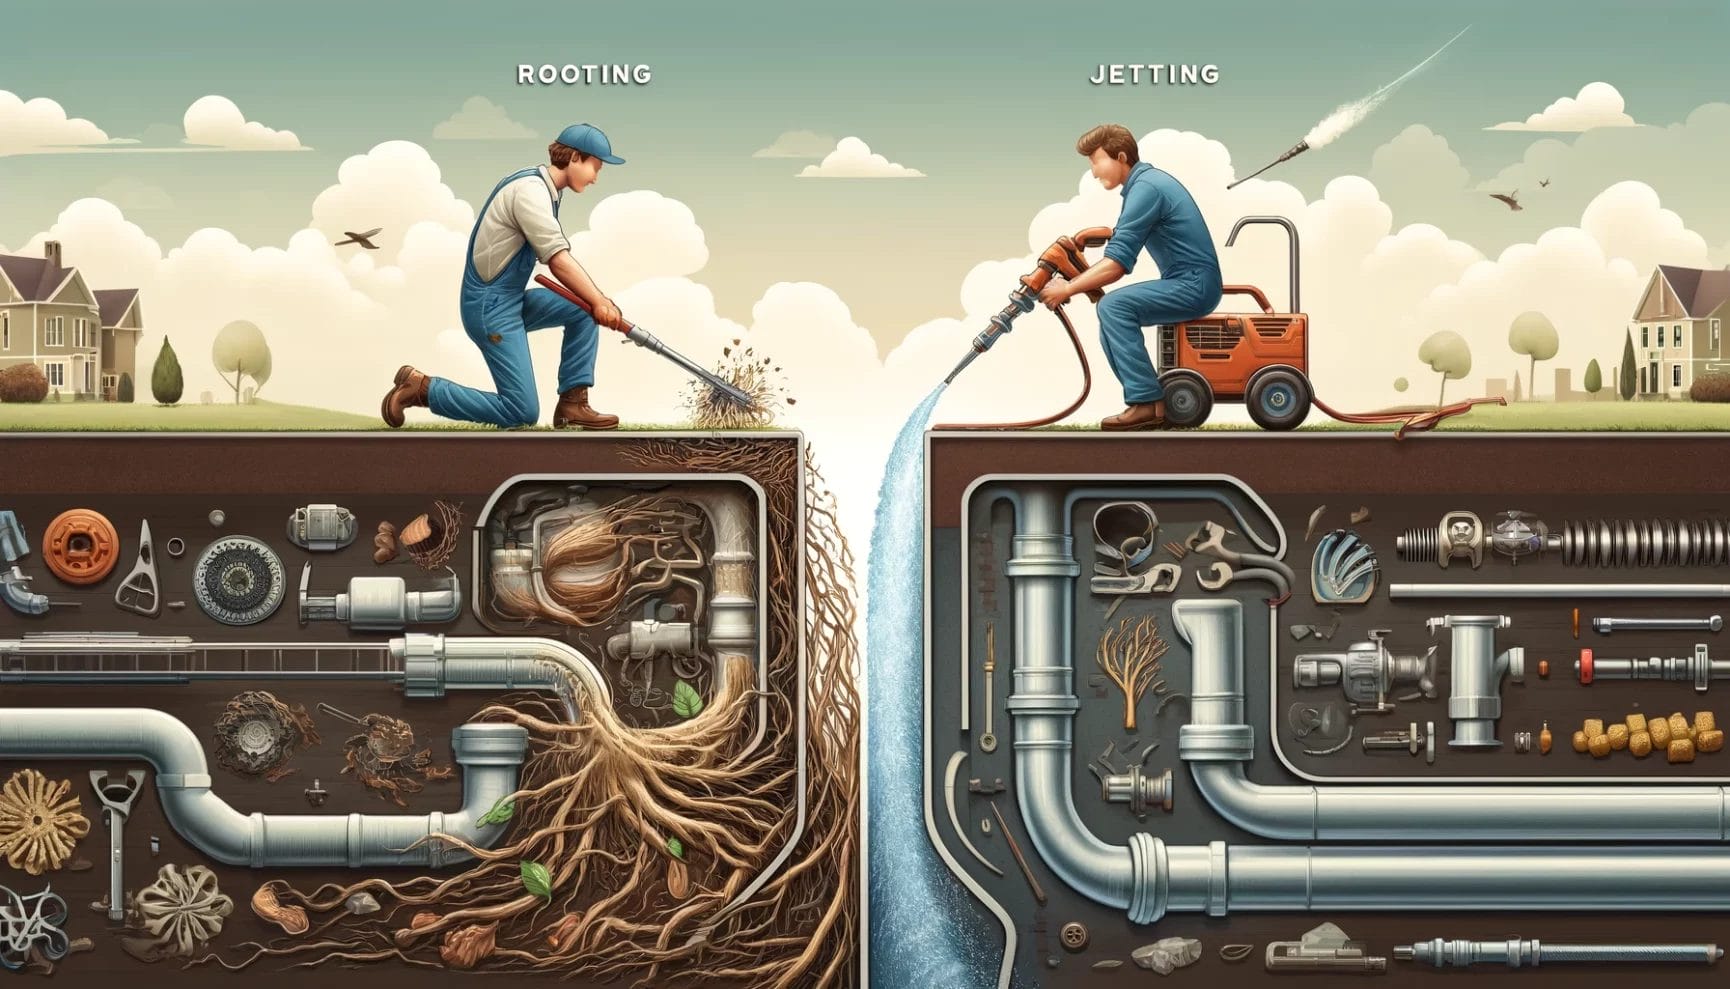 Depiction of plumbing professionals performing rooting and jetting services to clear underground pipes, shown in a cross-sectional illustration of the soil layers and pipes.